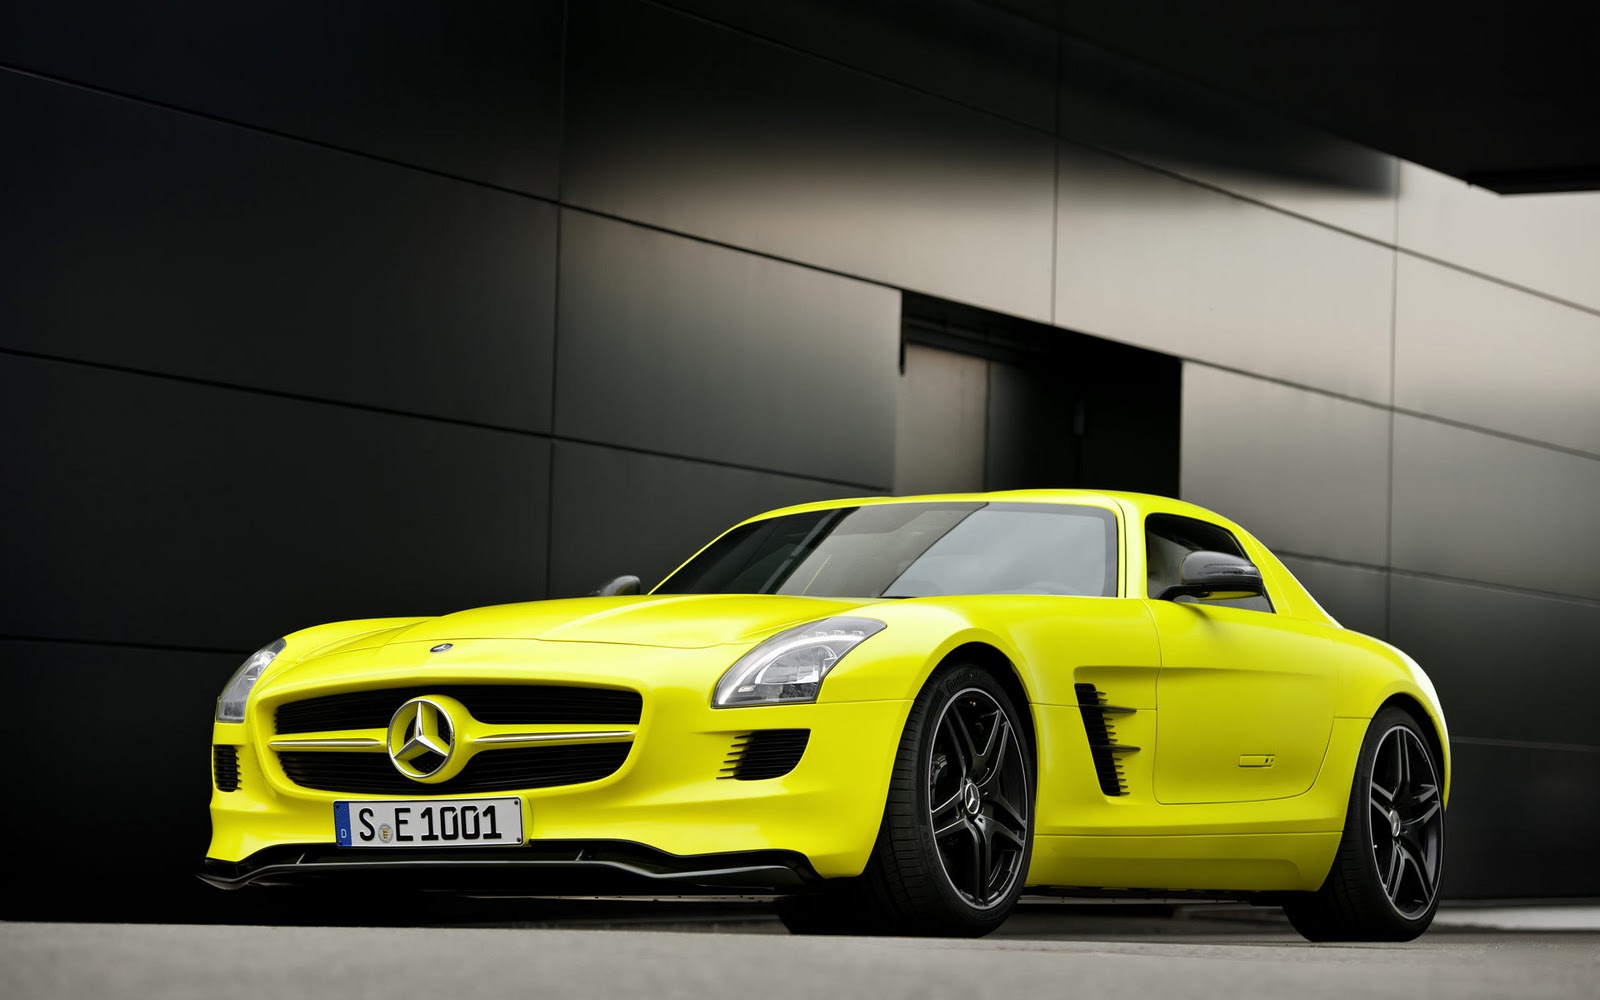 ALL SPORTS CARS & SPORTS BIKES : HD wallpapers of all type of sports